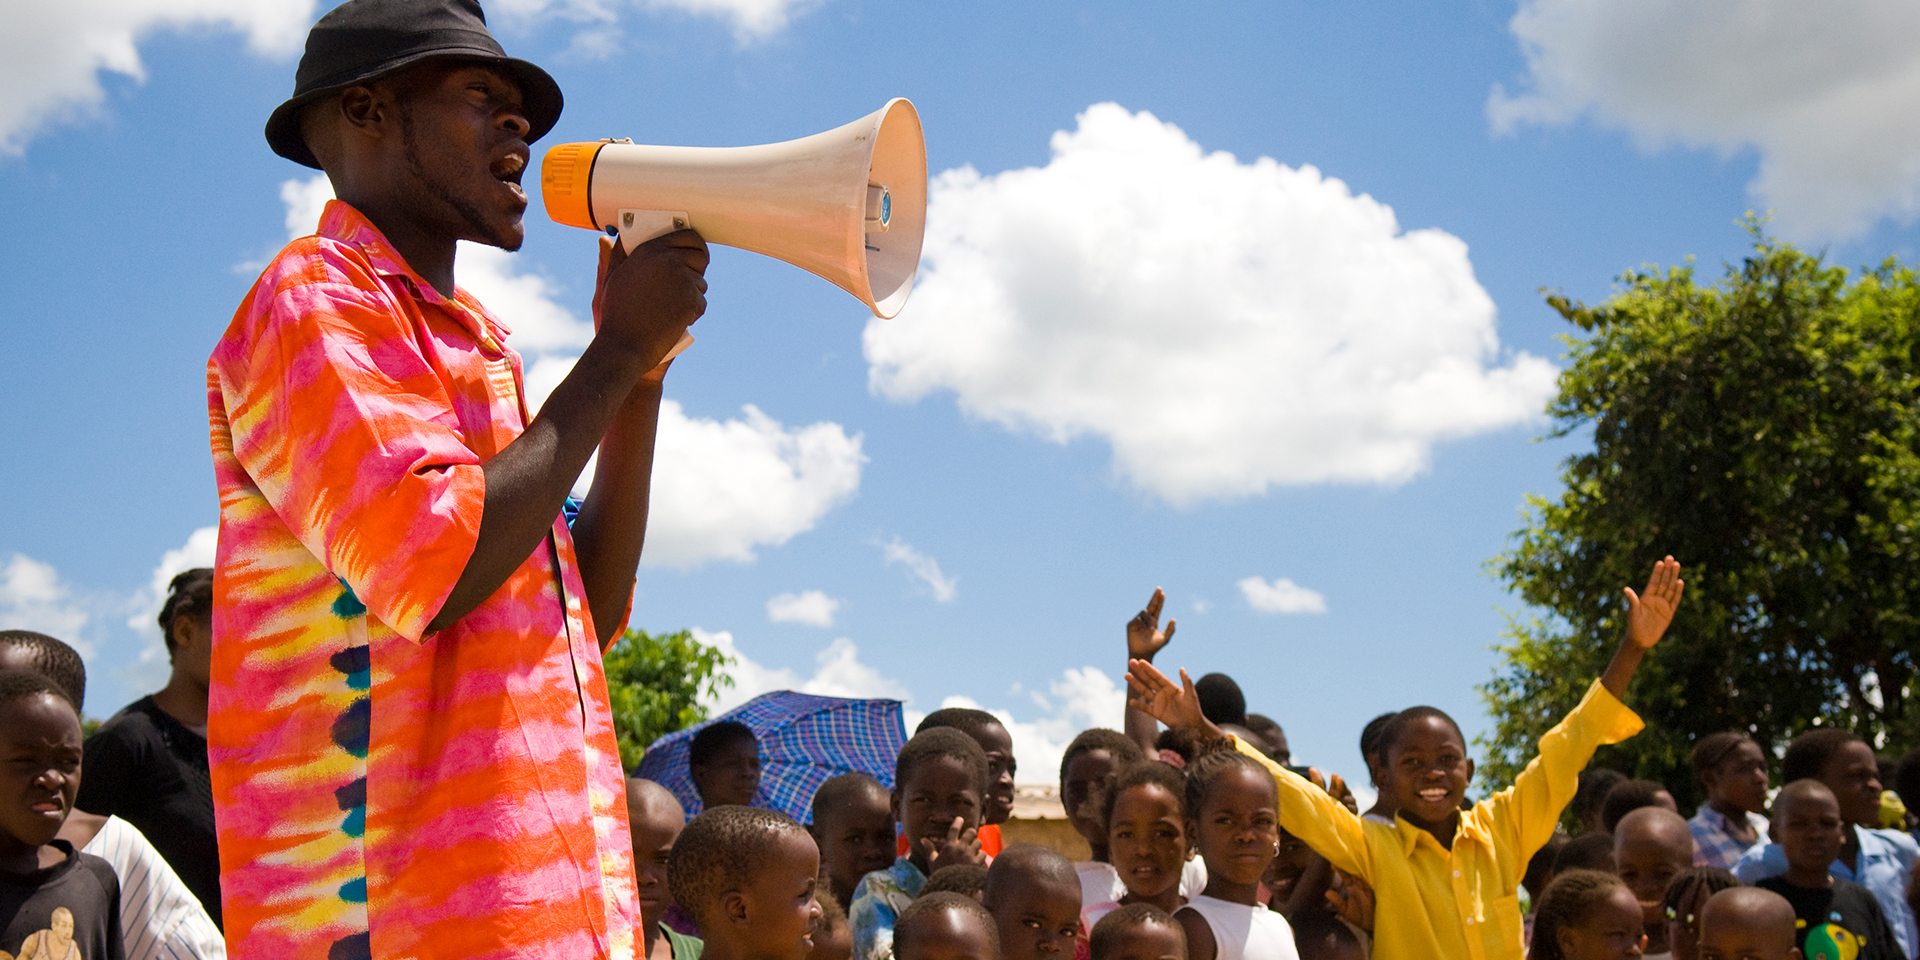 A man in a brightly colored shirt speaking into a megaphone as several children stand beside him.